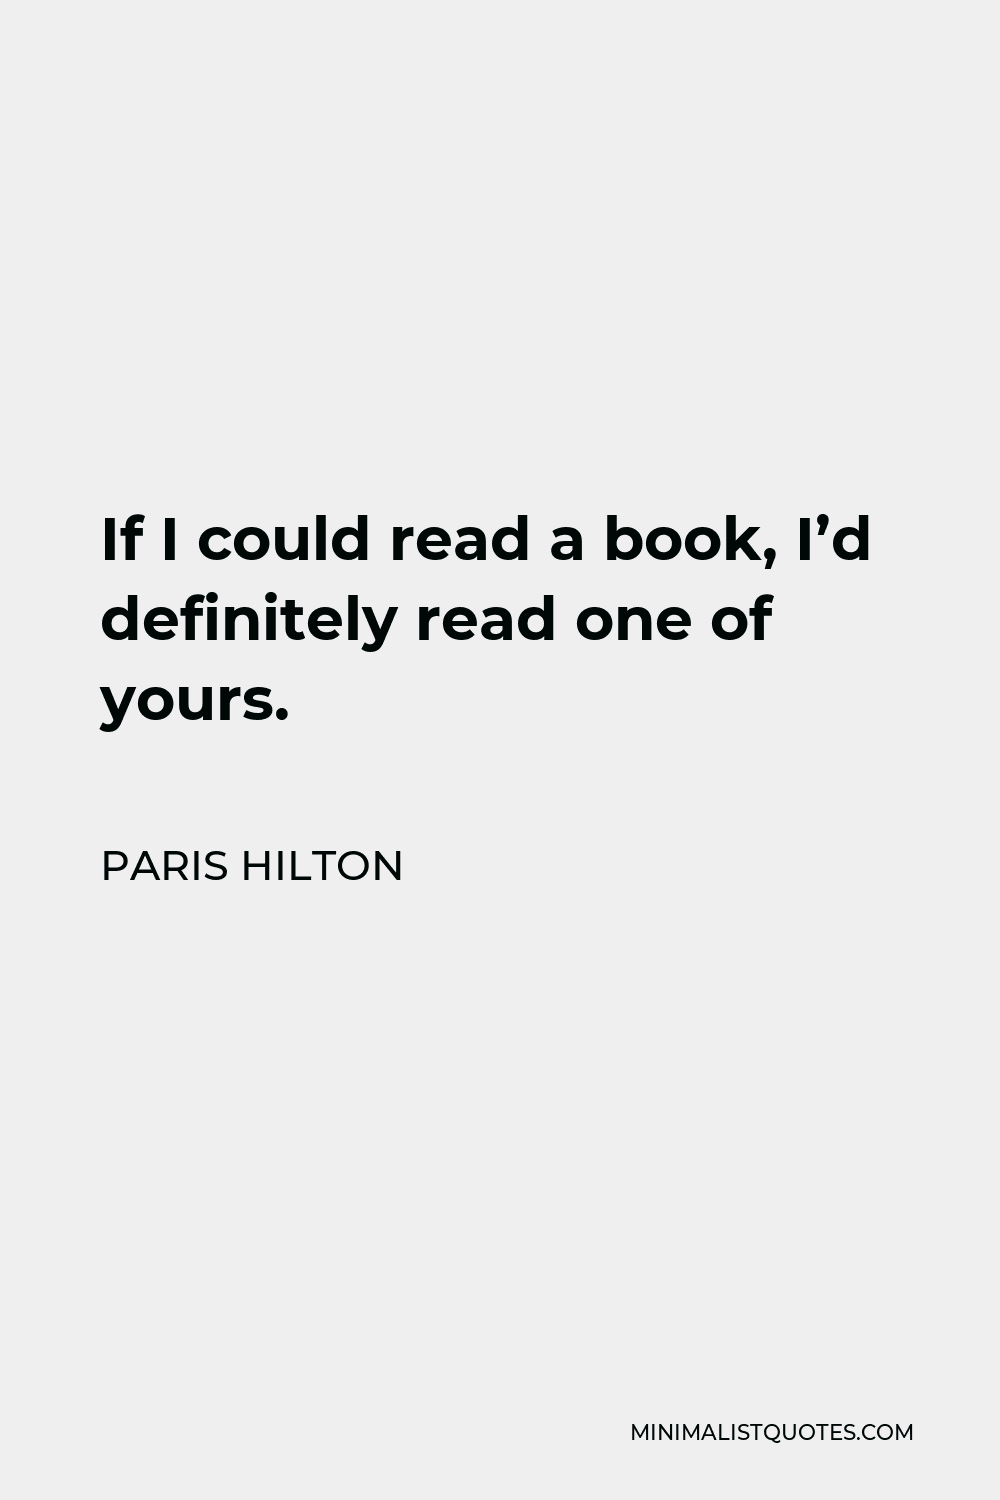 Paris Hilton Quote - If I could read a book, I’d definitely read one of yours.